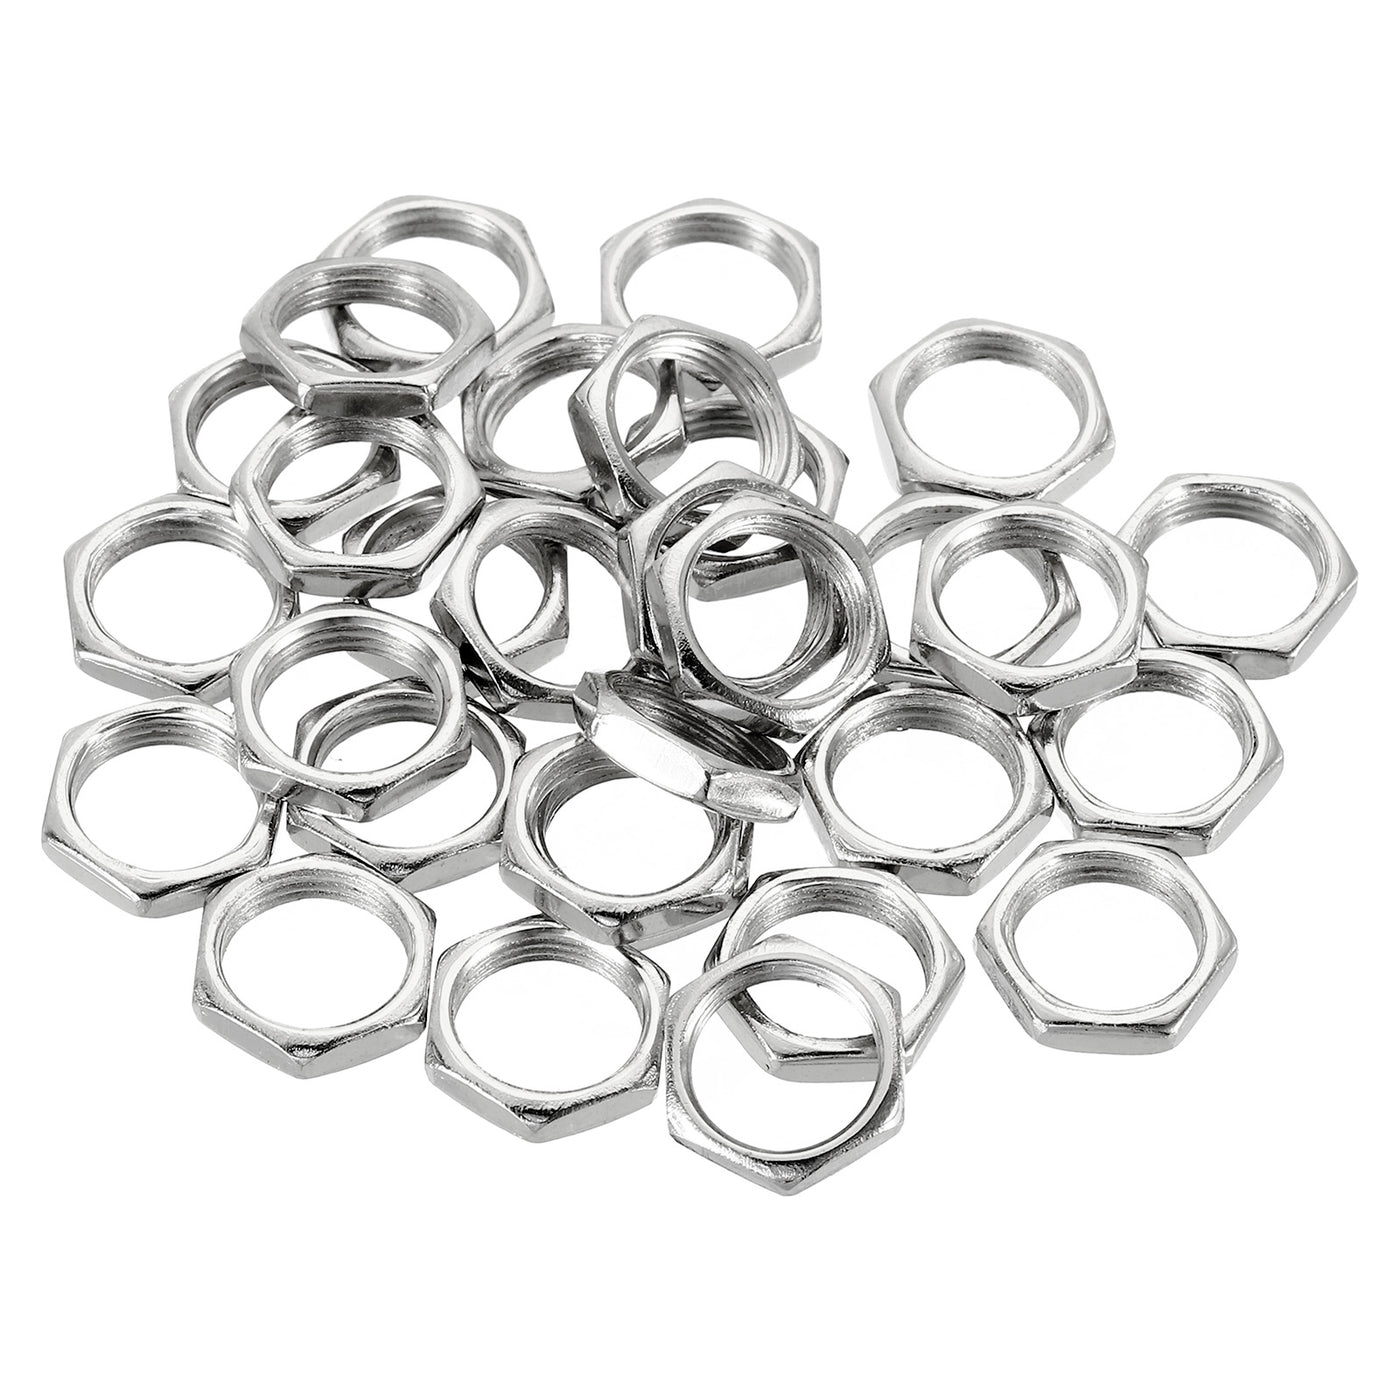 Harfington M10 x 0.75 Steel Hex Nuts, 30 Pack Metric Thread Zinc Plated Finished Hardware Nuts Screw Bolt Fasteners 3mm Height